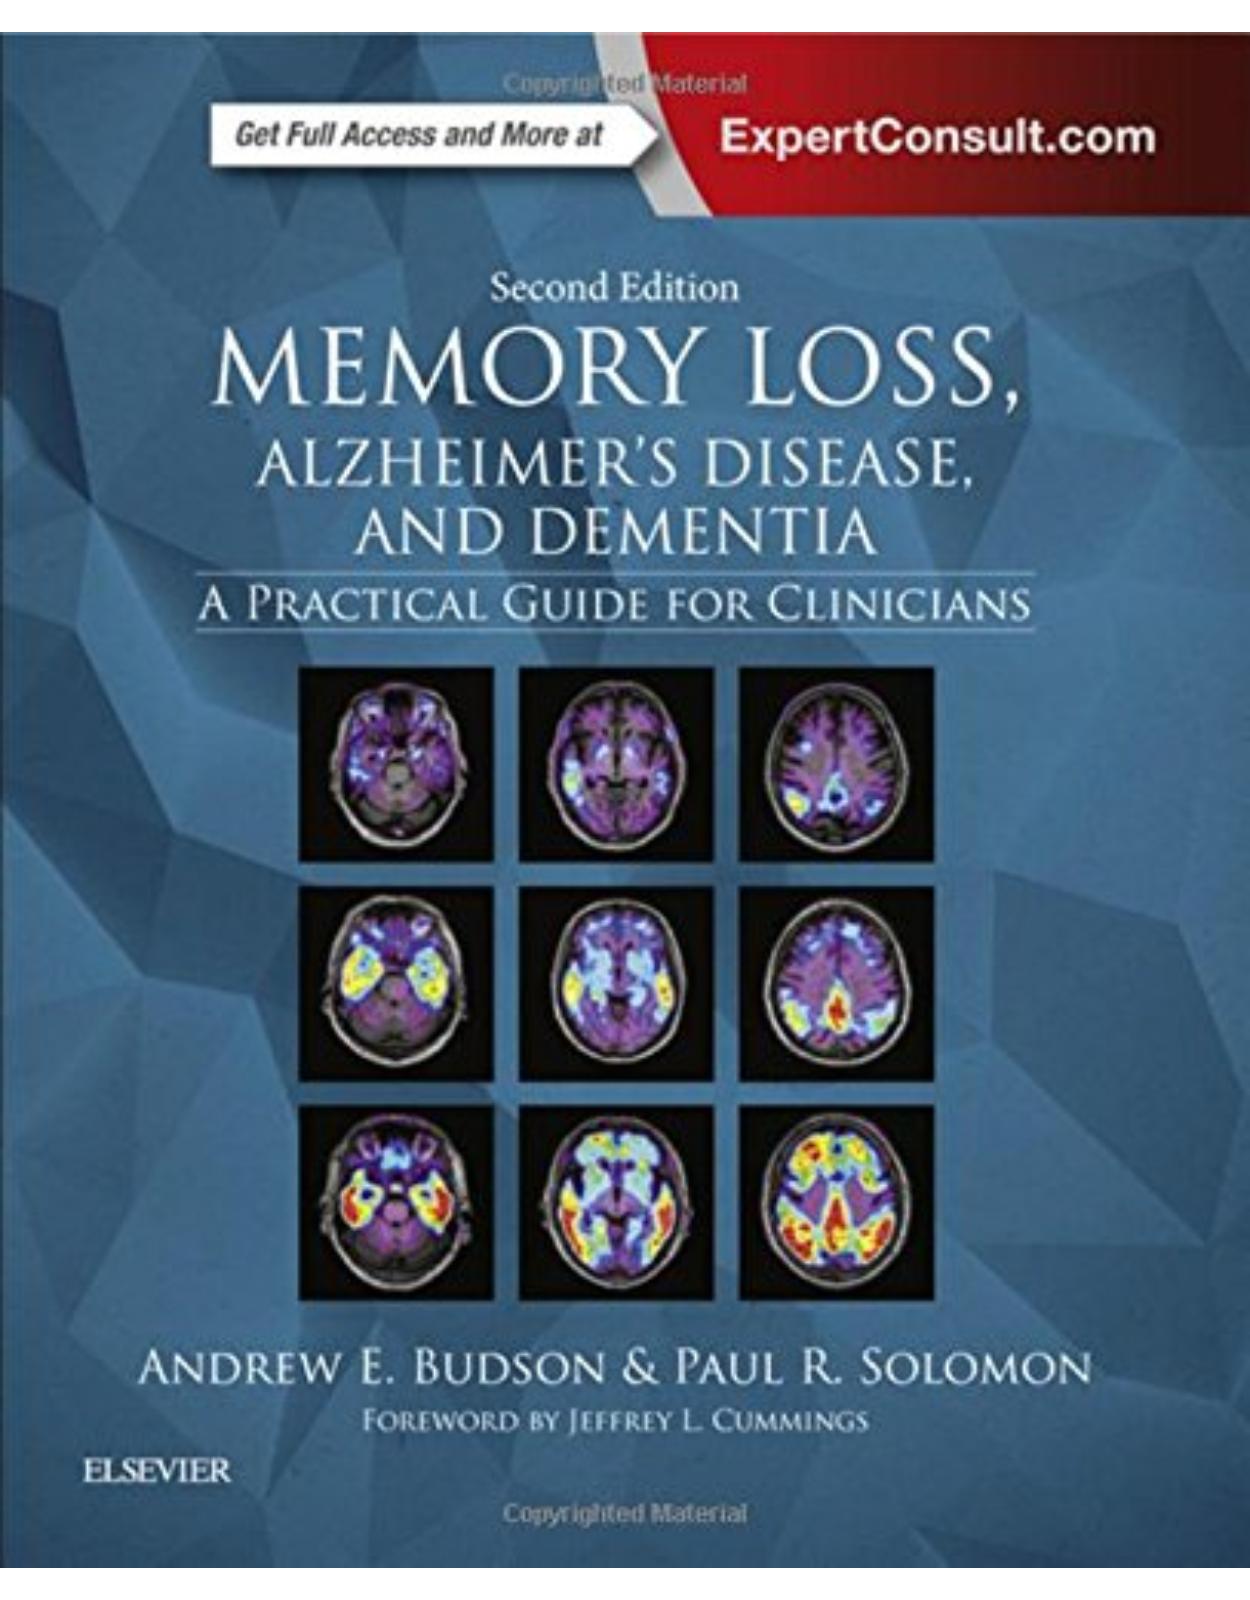 Memory Loss, Alzheimers Disease, and Dementia, A Practical Guide for Clinicians, 2nd Edition